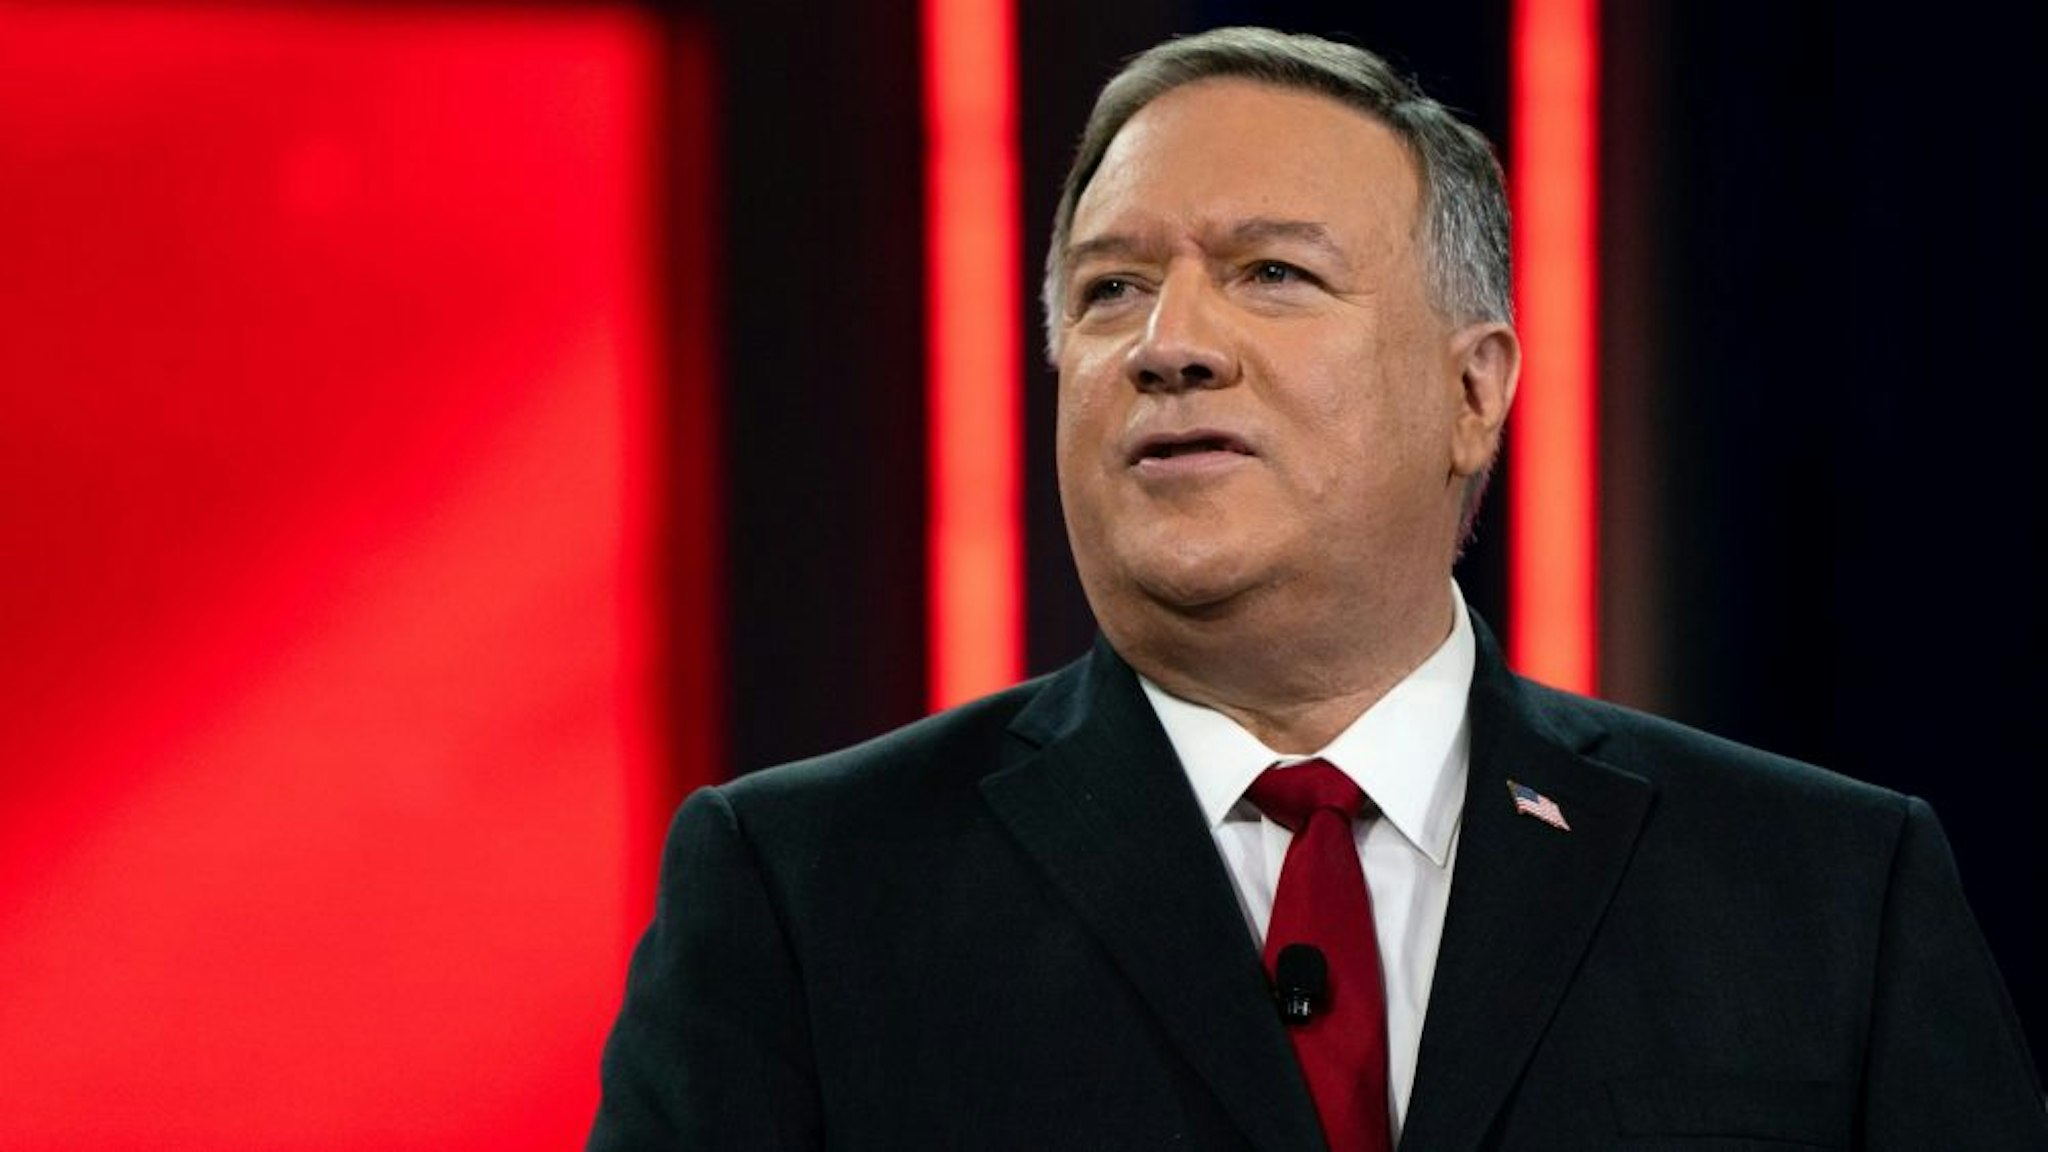 Michael Pompeo, former U.S. Secretary of State, speaks during the Conservative Political Action Conference (CPAC) in Orlando, Florida, U.S., on Saturday, Feb. 27, 2021. Donald Trump will speak at the annual Conservative Political Action Campaign conference in Florida, his first public appearance since leaving the White House, to an audience of mostly loyal followers.